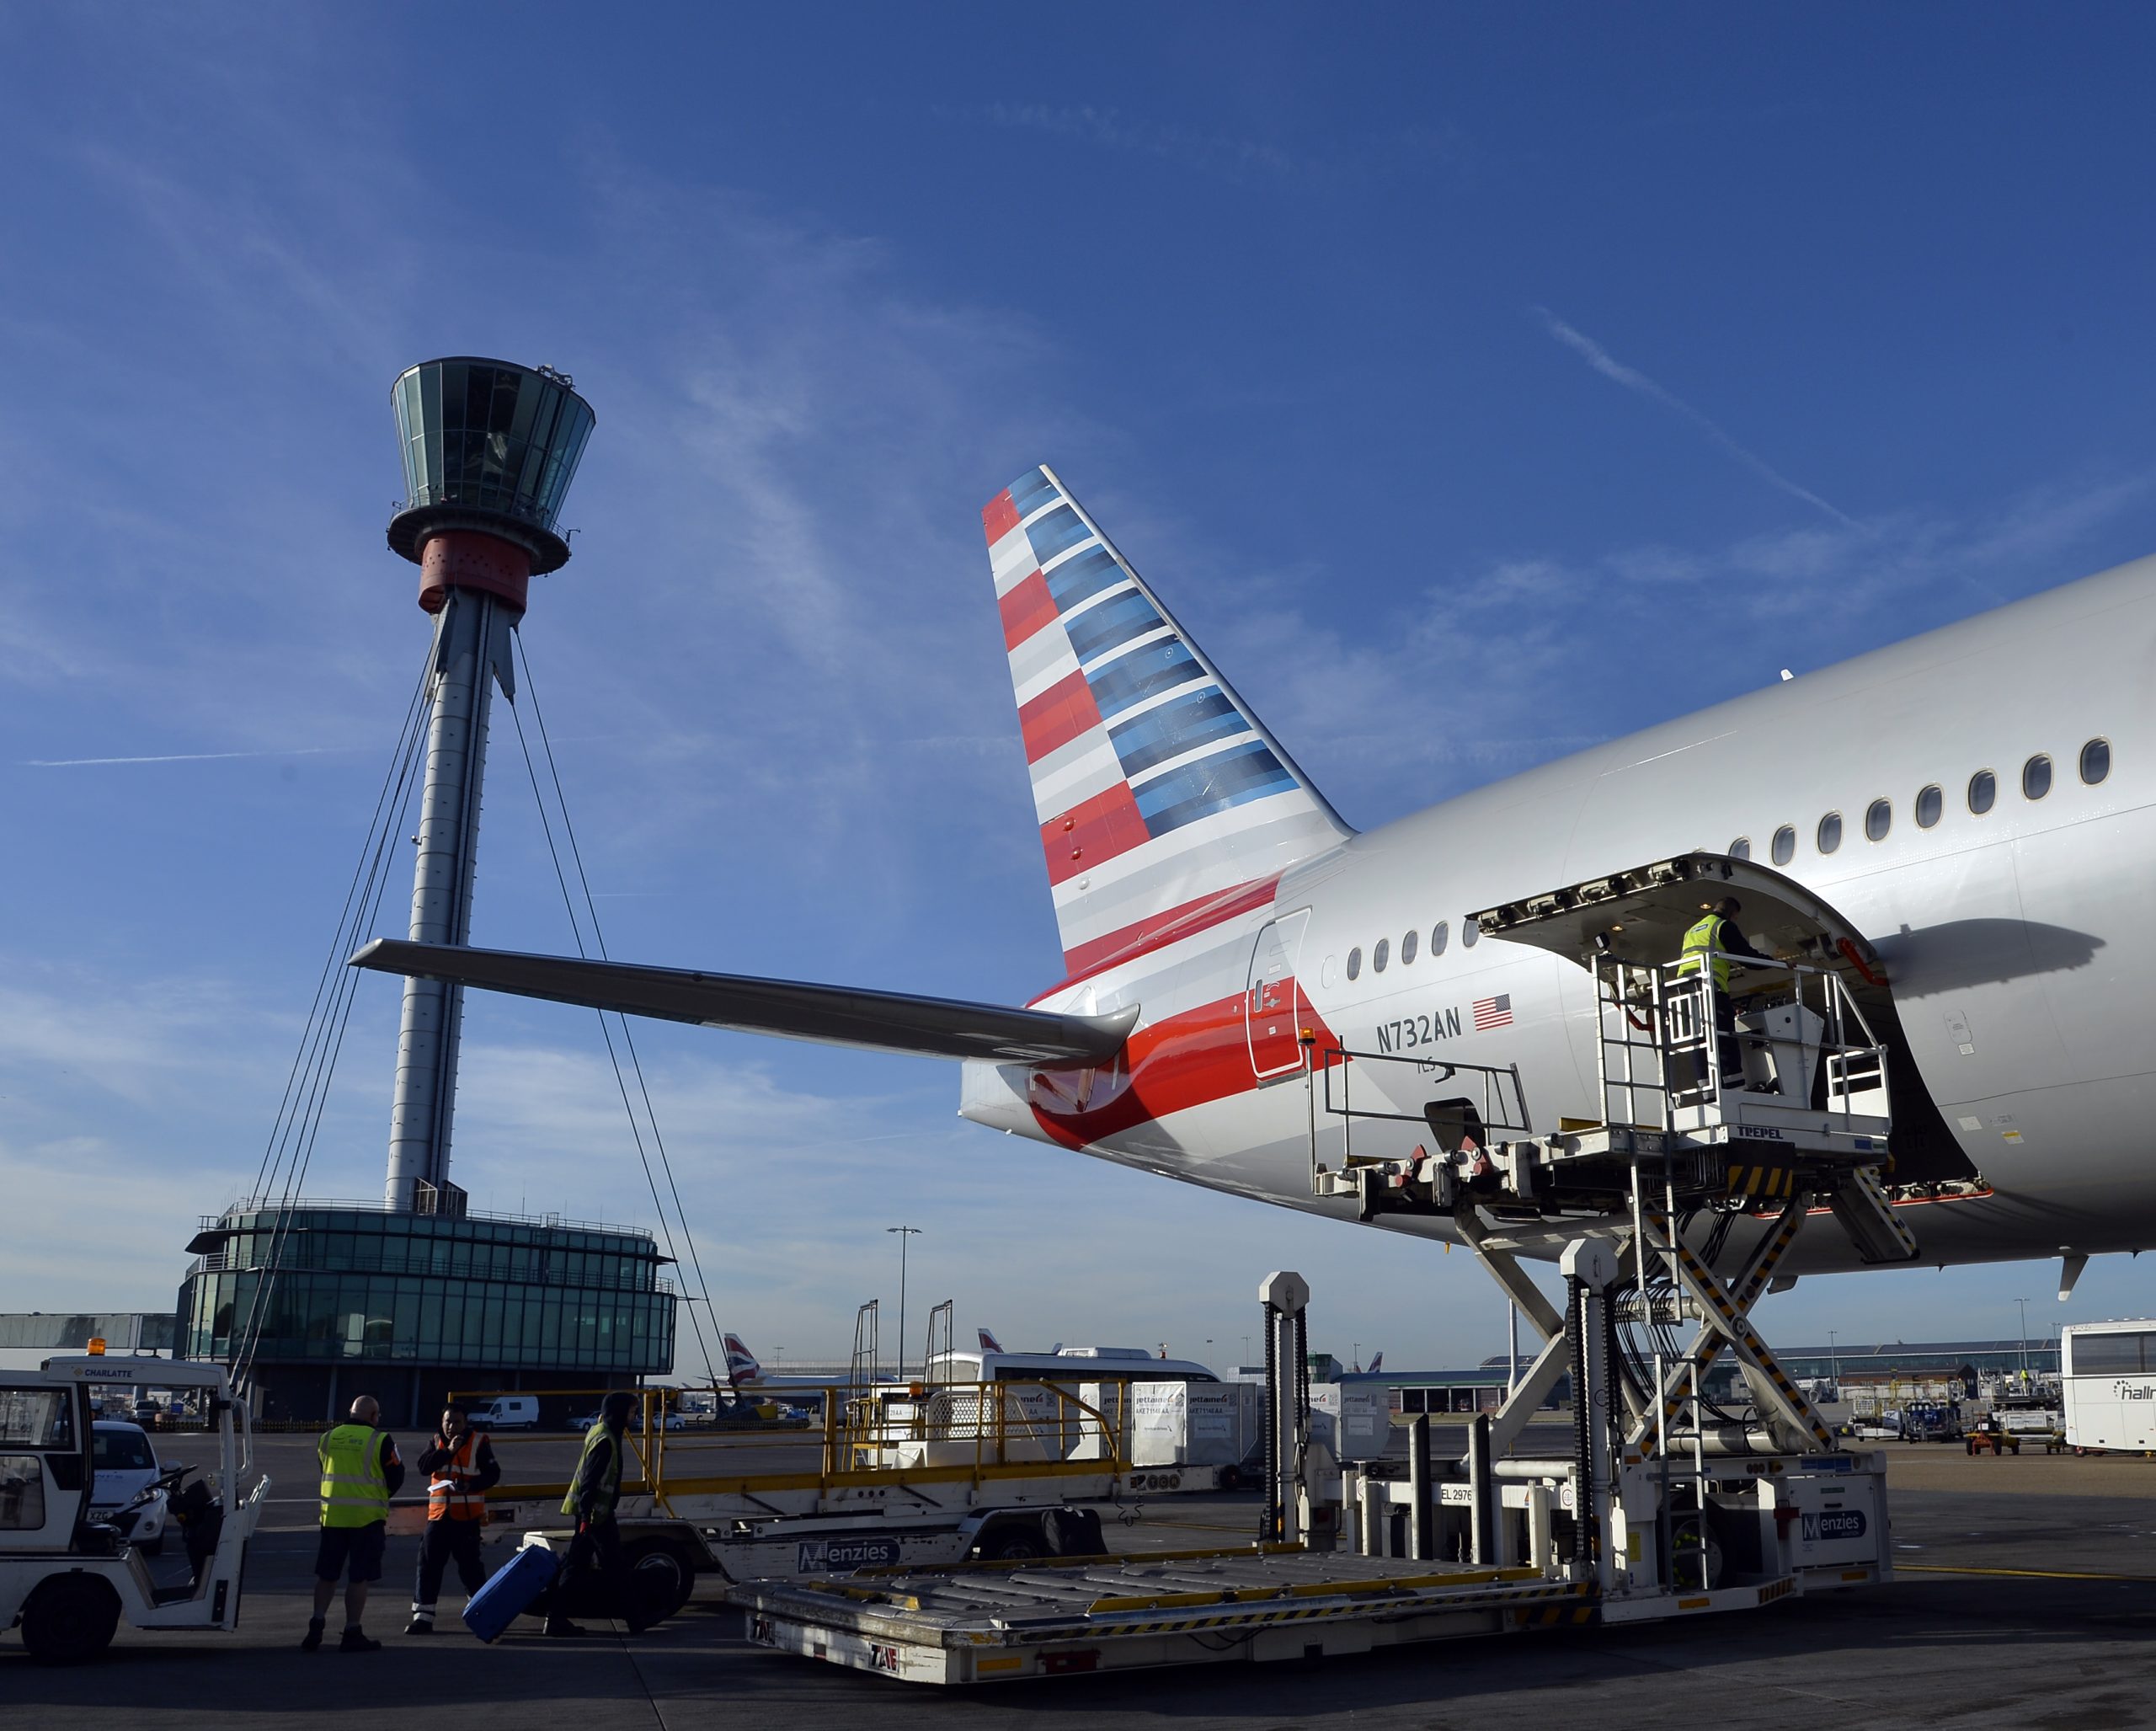 Photo: American Airliens ground staff load an American Airlines flight at Heathrow. Photo Credit: Heathrow Airport